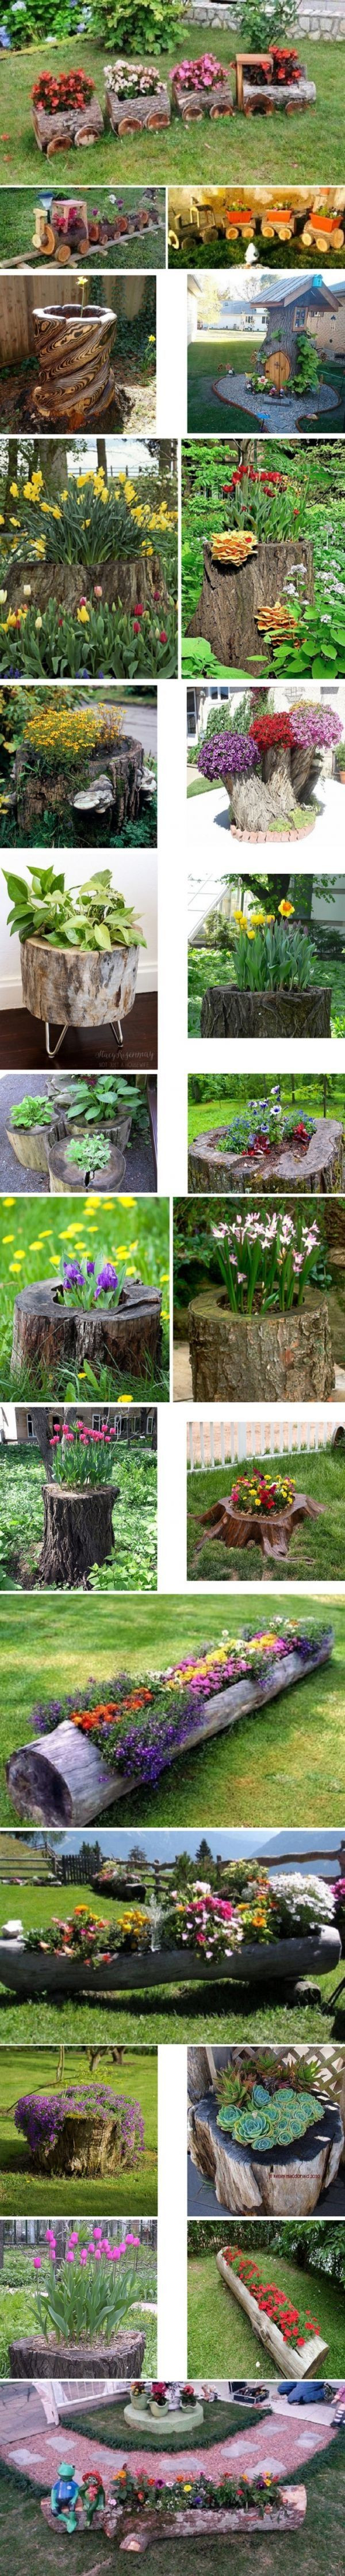 14 Lovable Tree Stump Vases for Sale 2024 free download tree stump vases for sale of 24 tree stumps turned into beautiful flower planters woodworkerz in 24 tree stumps turned into beautiful flower planters woodworkerz com